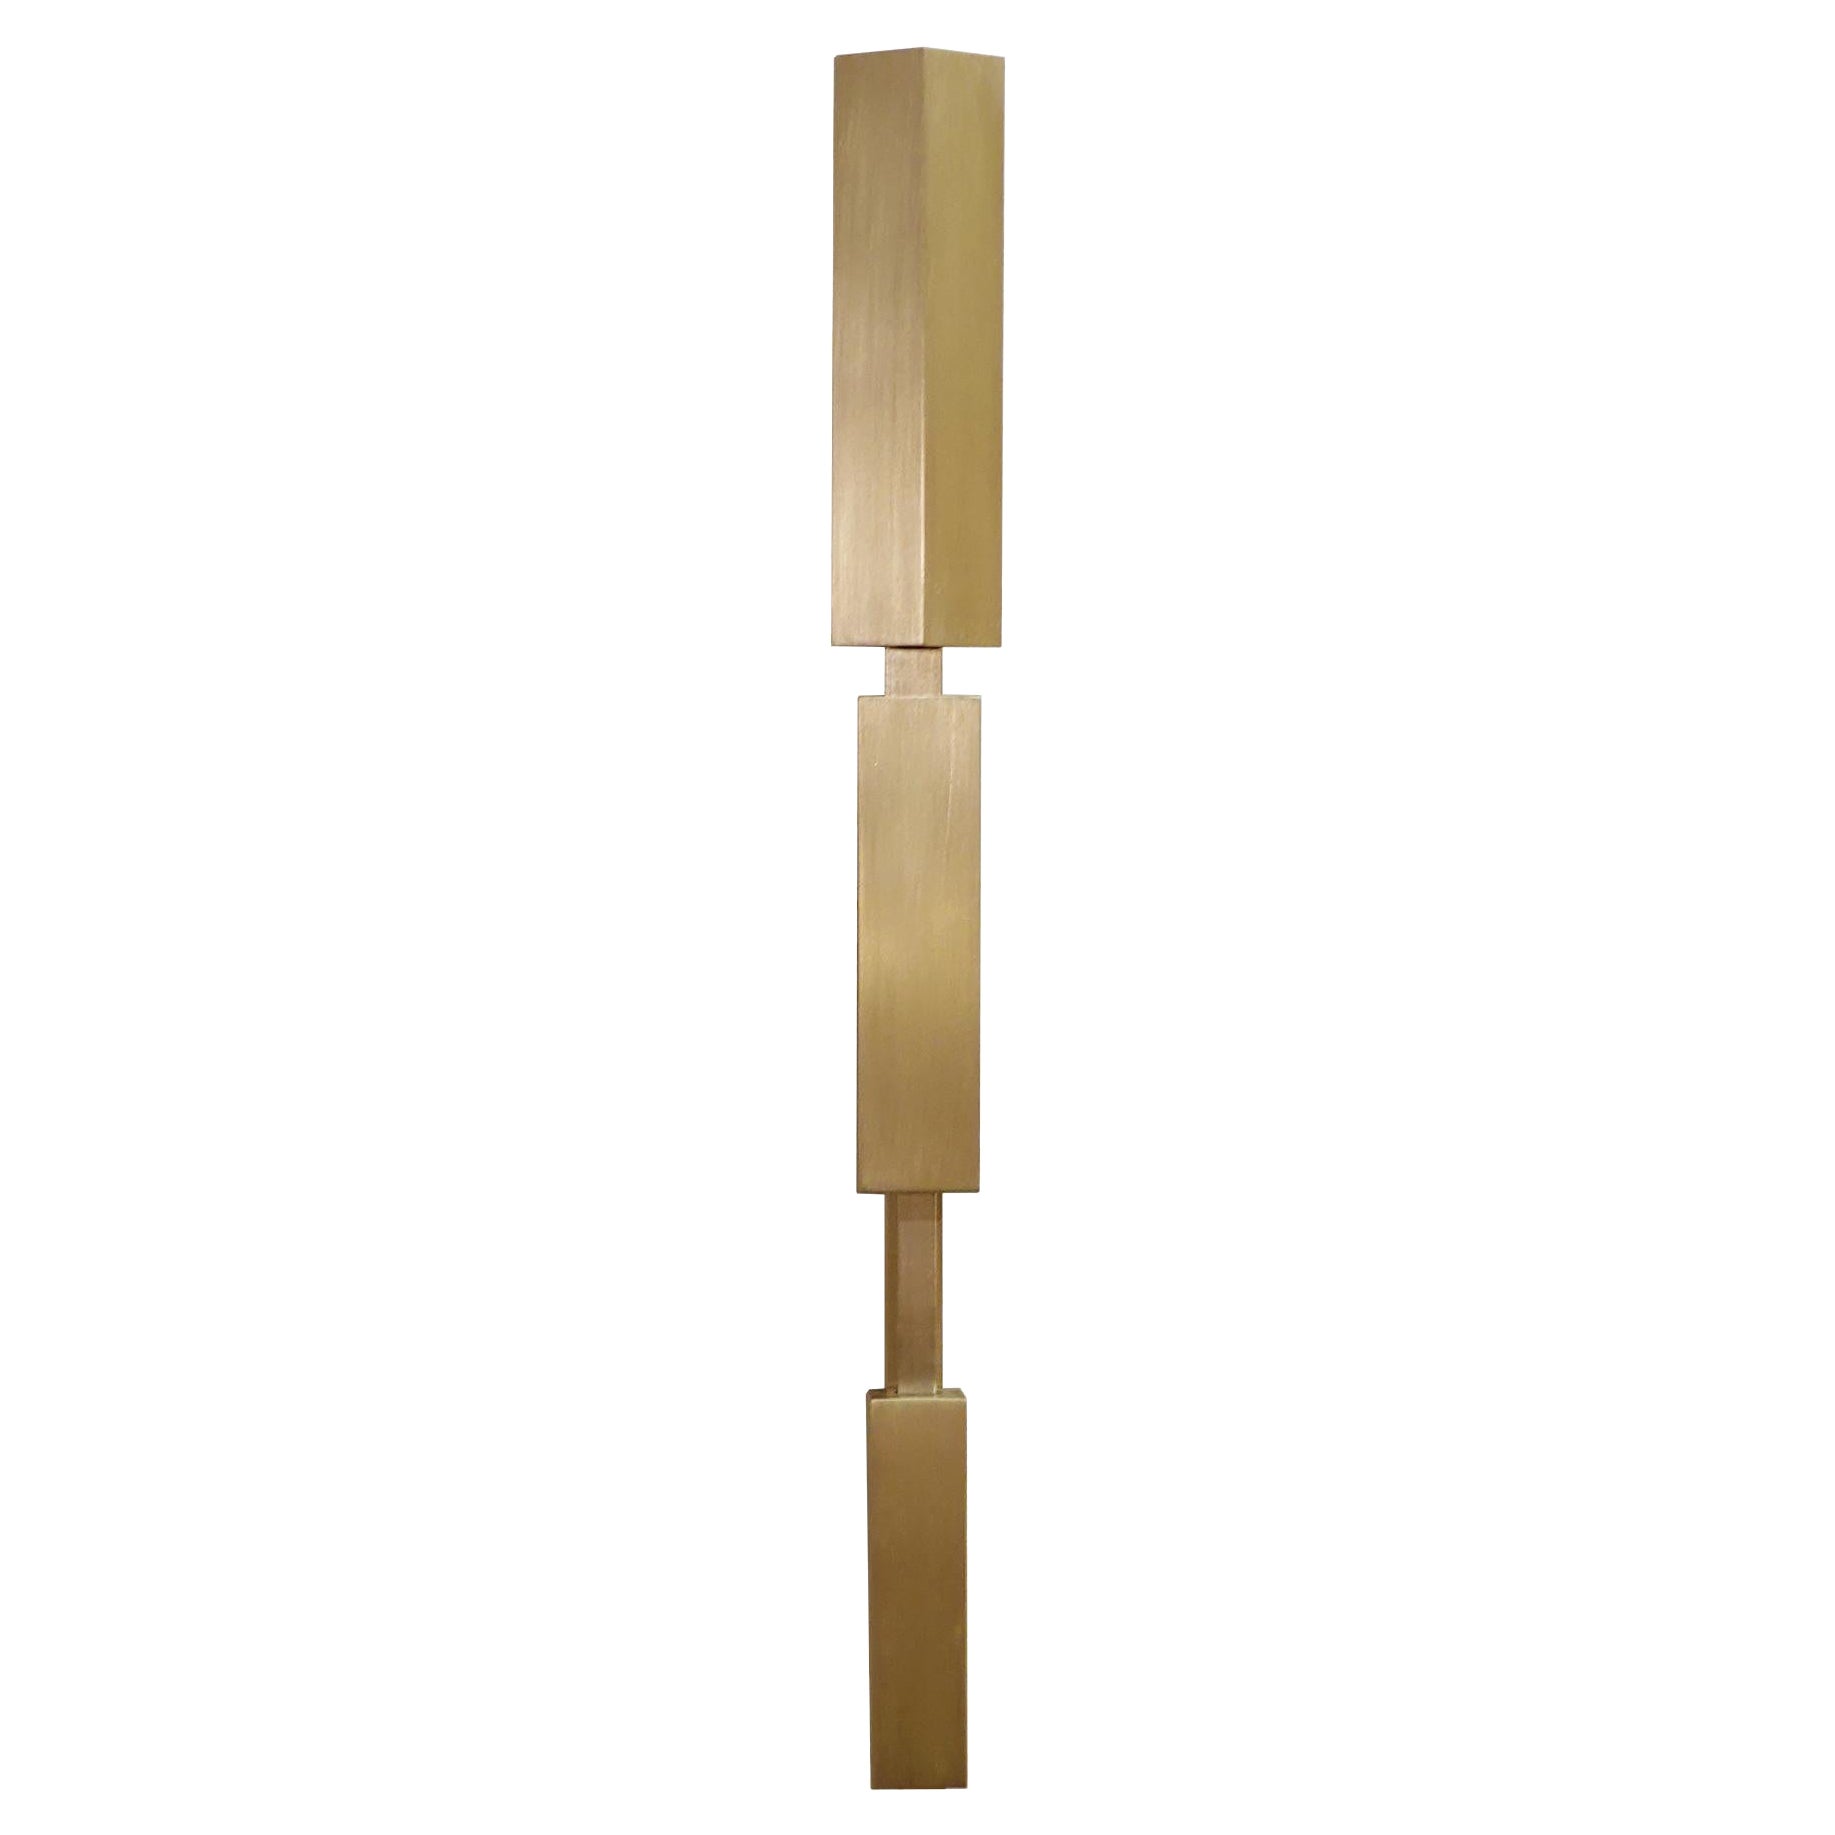 Tetra Interactive Wall Sconce Brass by Diaphan Studio, REP by Tuleste Factory